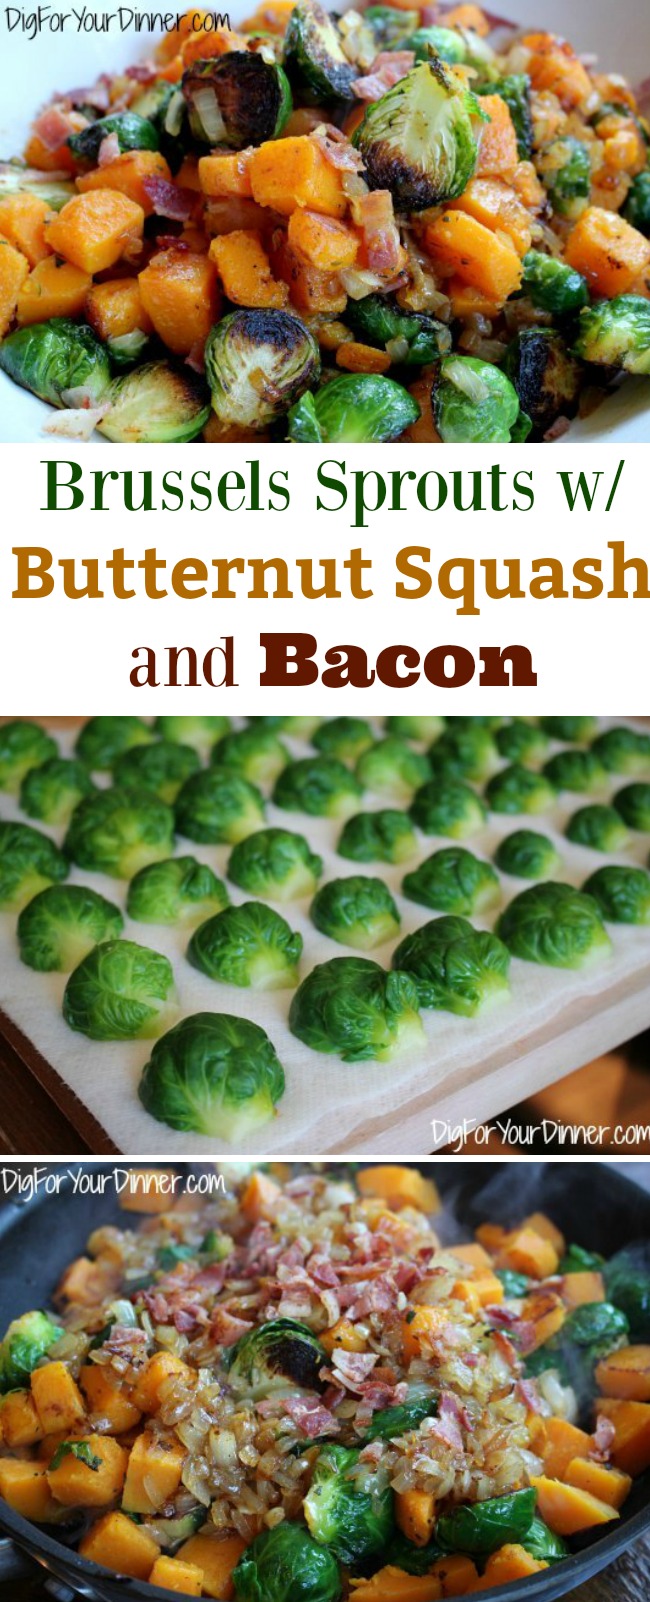 Brussels Sprouts with Butternut Squash and Bacon